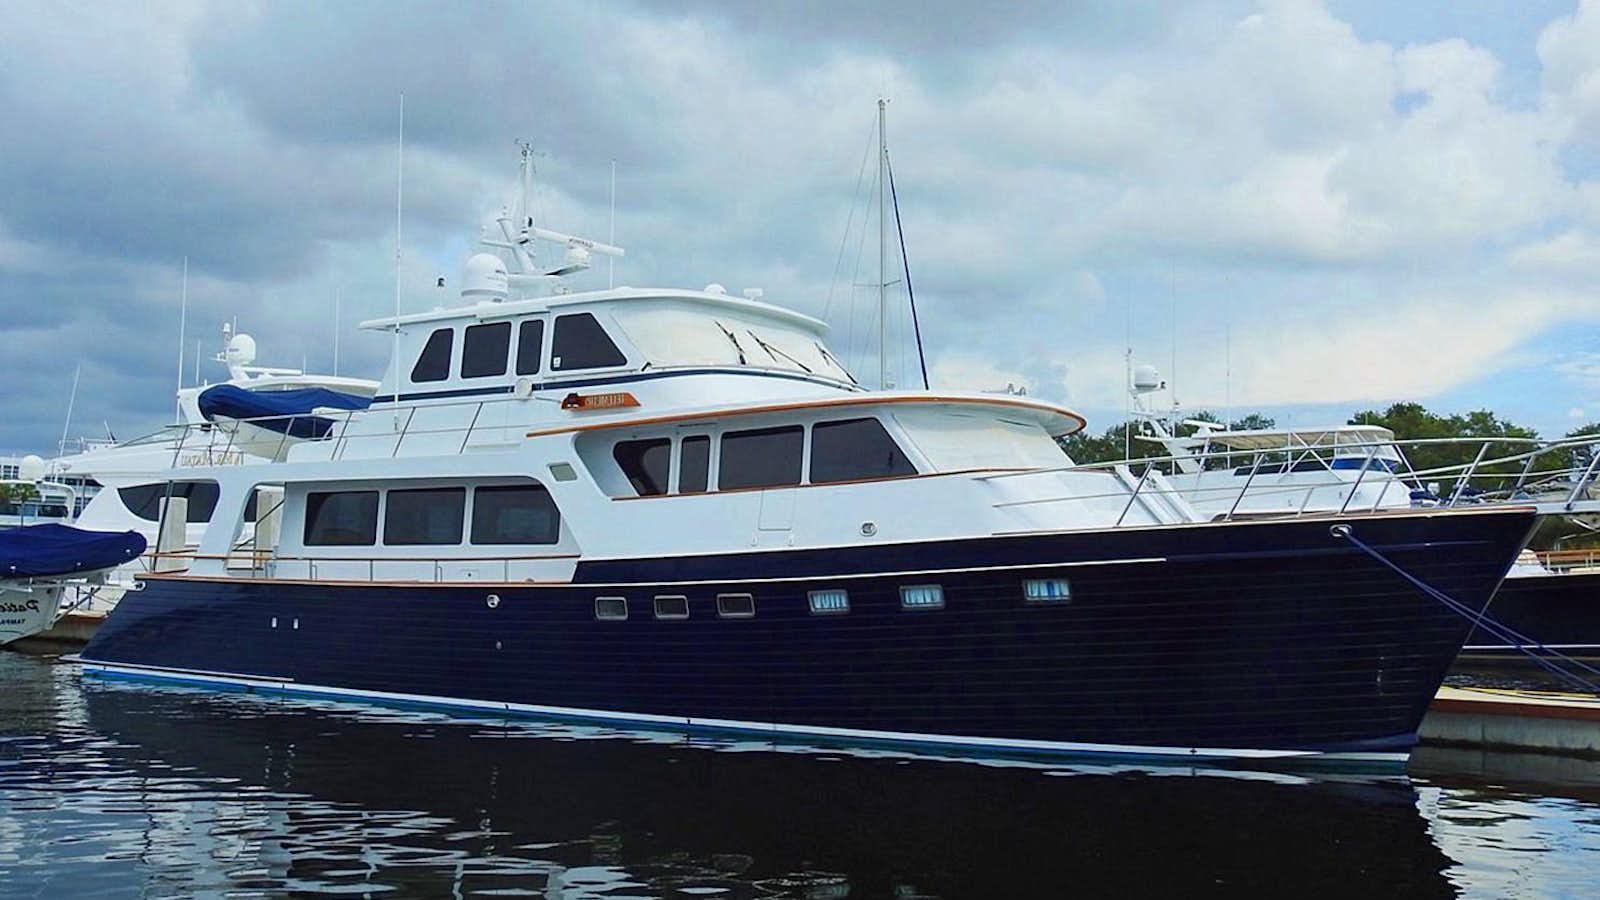 Telemetry Yacht for Sale